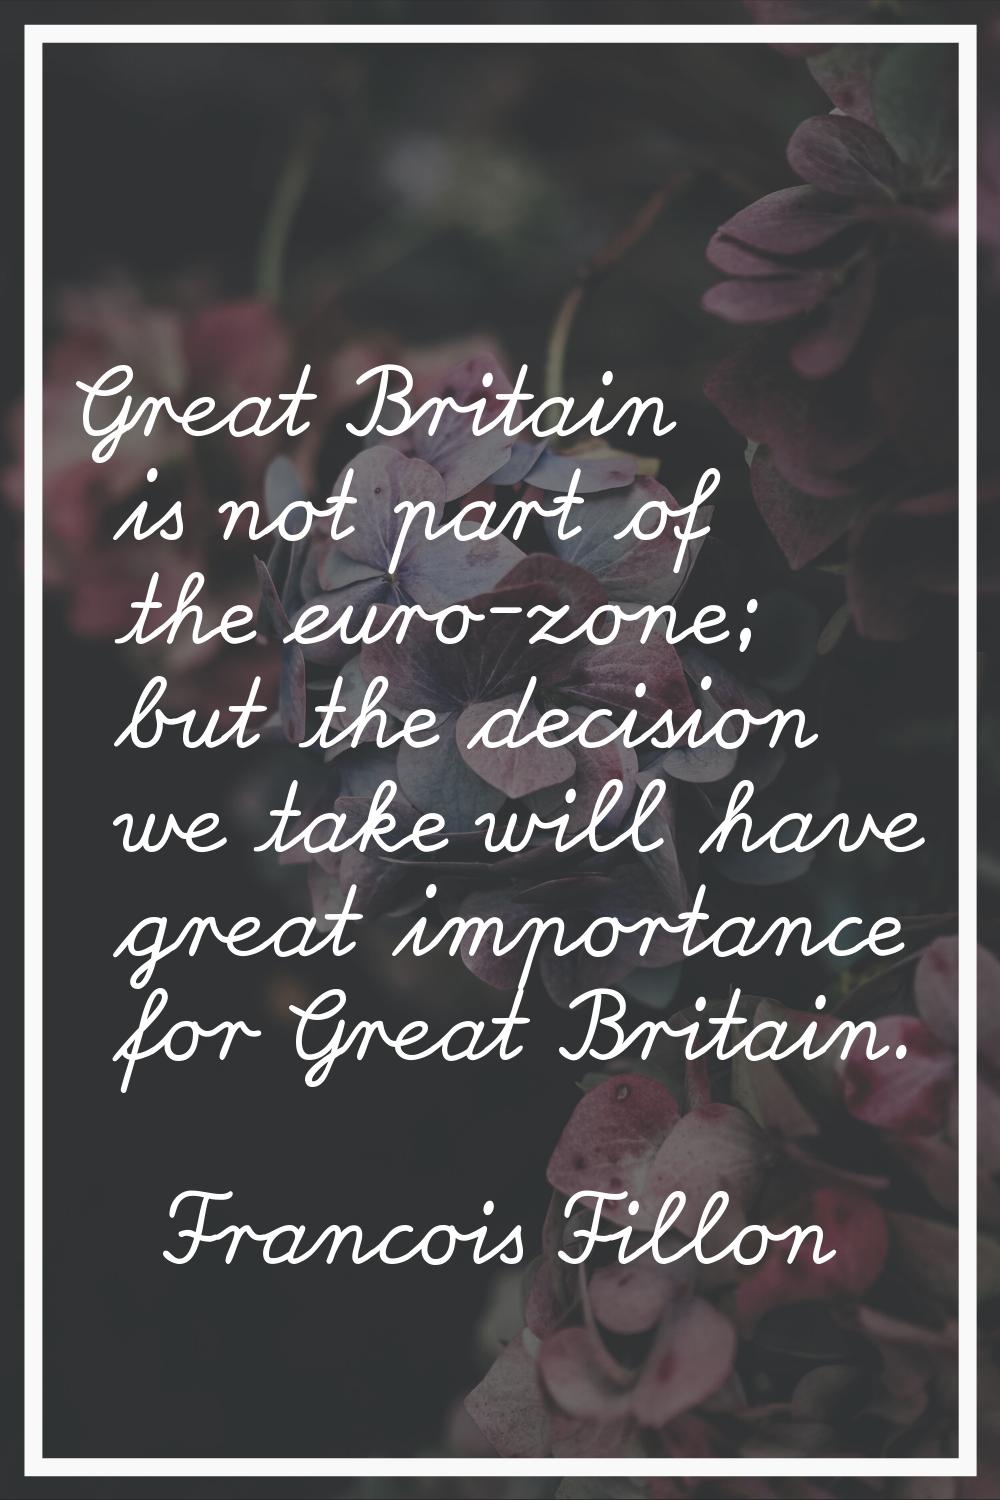 Great Britain is not part of the euro-zone; but the decision we take will have great importance for